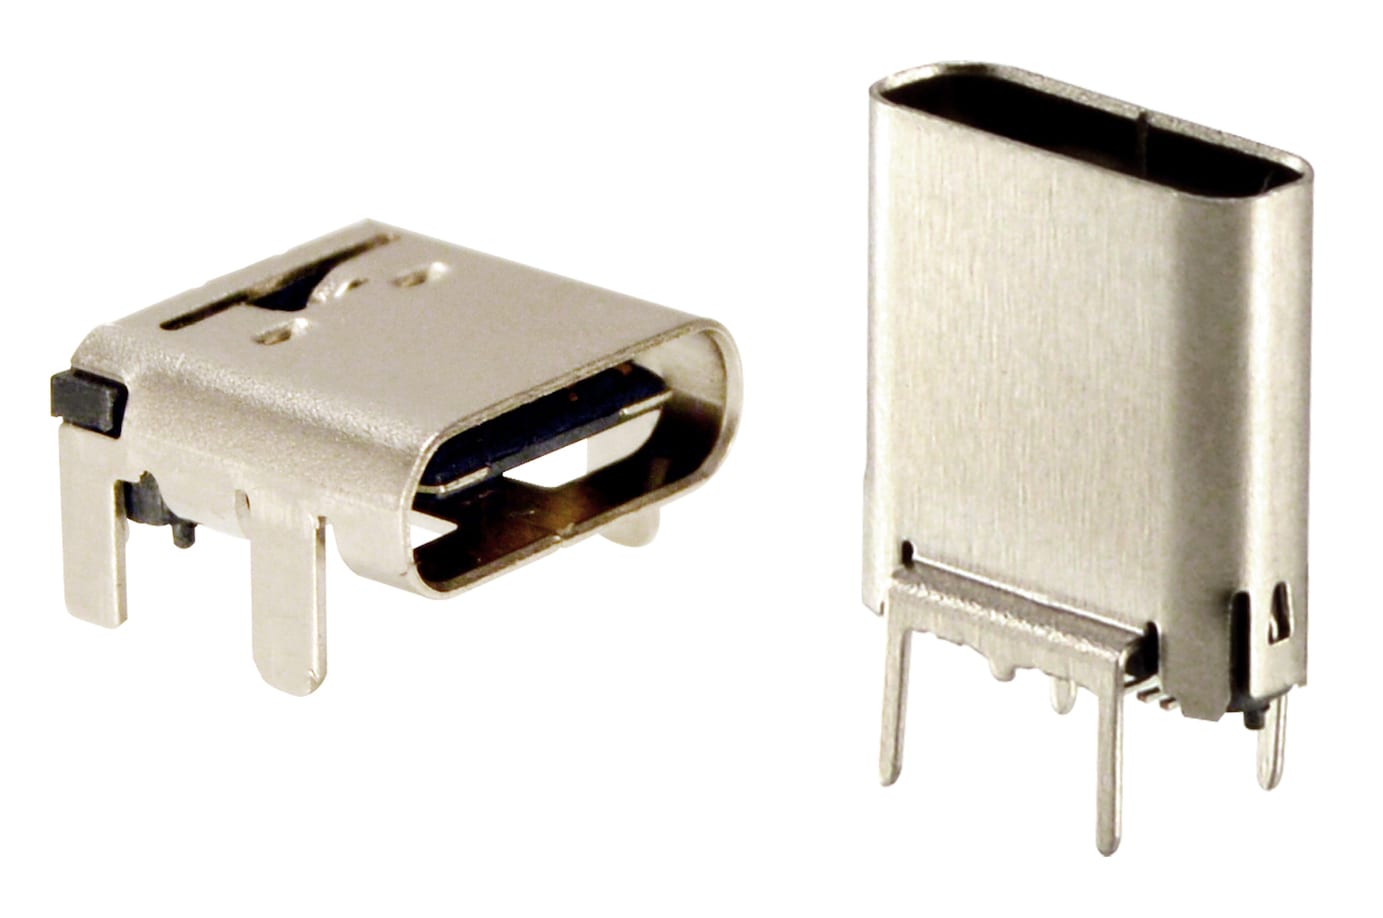 Kycon expanded its USB Series with the addition of both vertical and right-angle USB 3.1 Type-C female port connectors